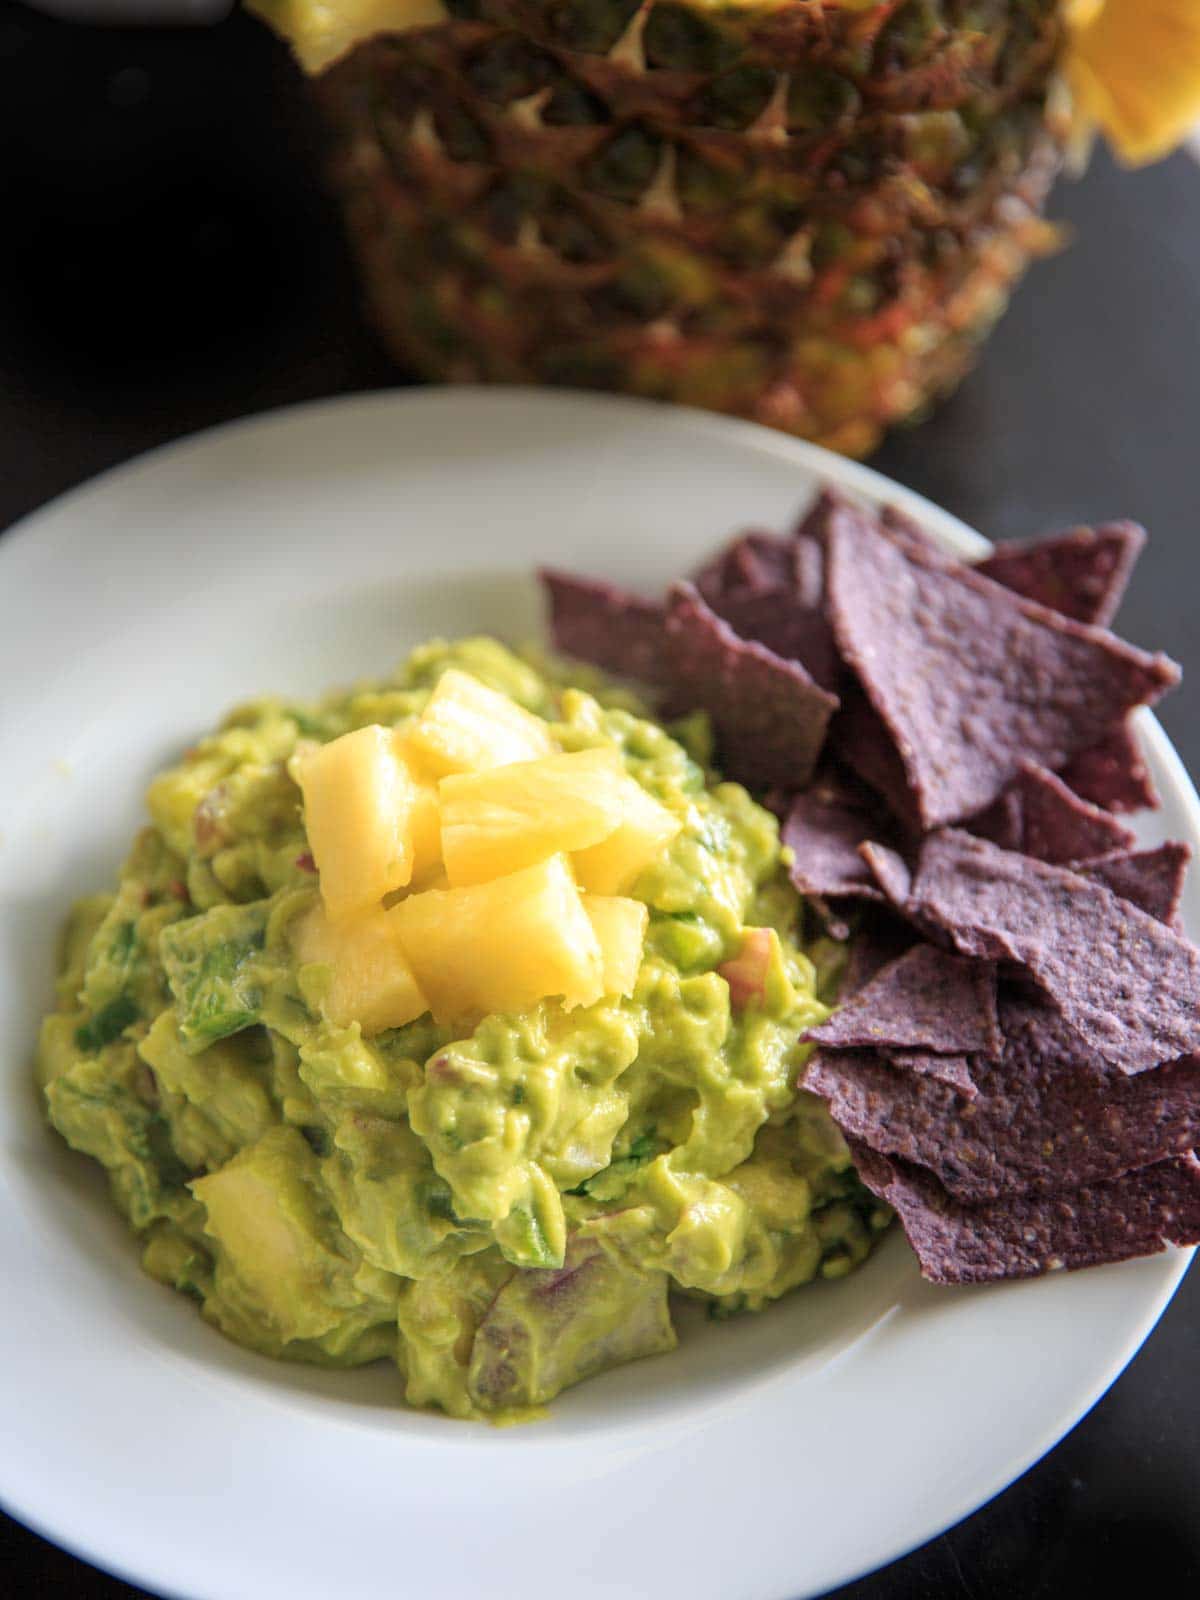 Pineapple Jalapeno Guacamole is a tropical spin on this favorite appetizer dip. Great for summer gatherings, cookouts and gatherings!